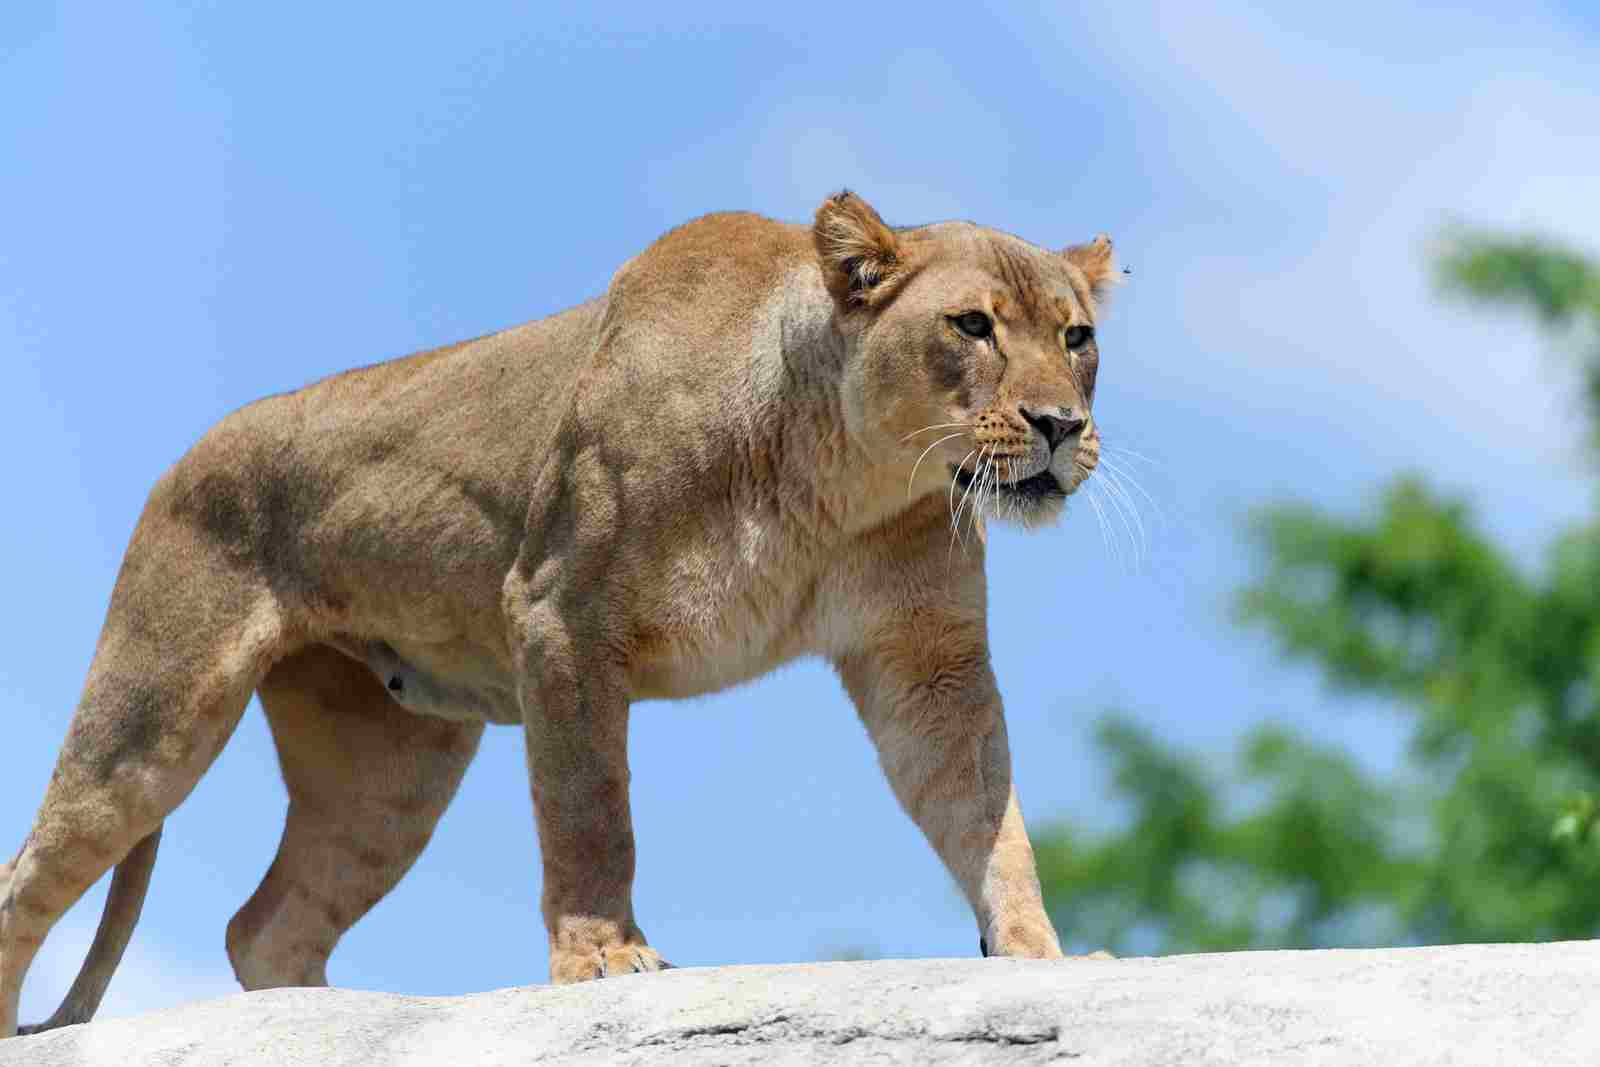 Mountain Lion Vs Lion: A Lion is Much Larger, Heavier and Stronger Than a Mountain Lion (Credit: Eric Kilby 2016, Uploaded Online 2017 .CC BY-SA 2.0.)